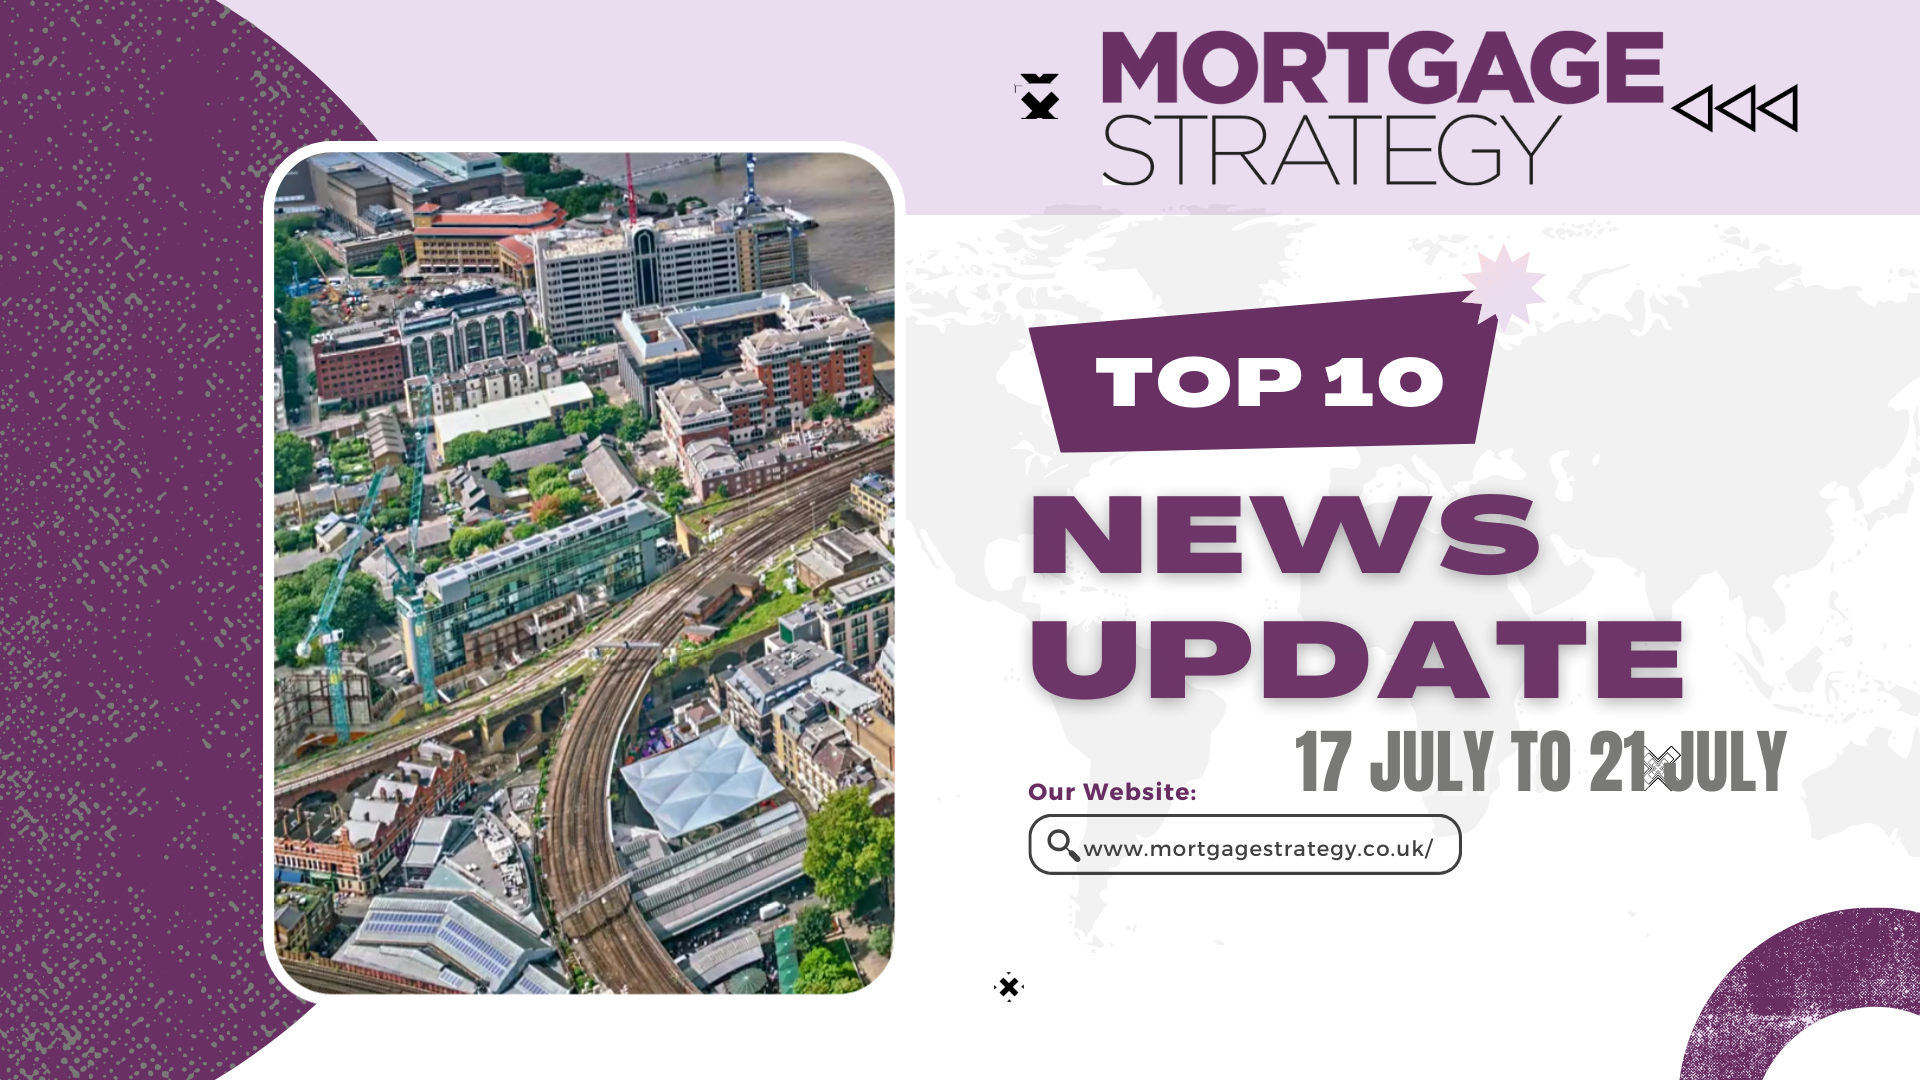 Mortgage-Strategys-Top-10-Stories-17-July-to-21-July.png